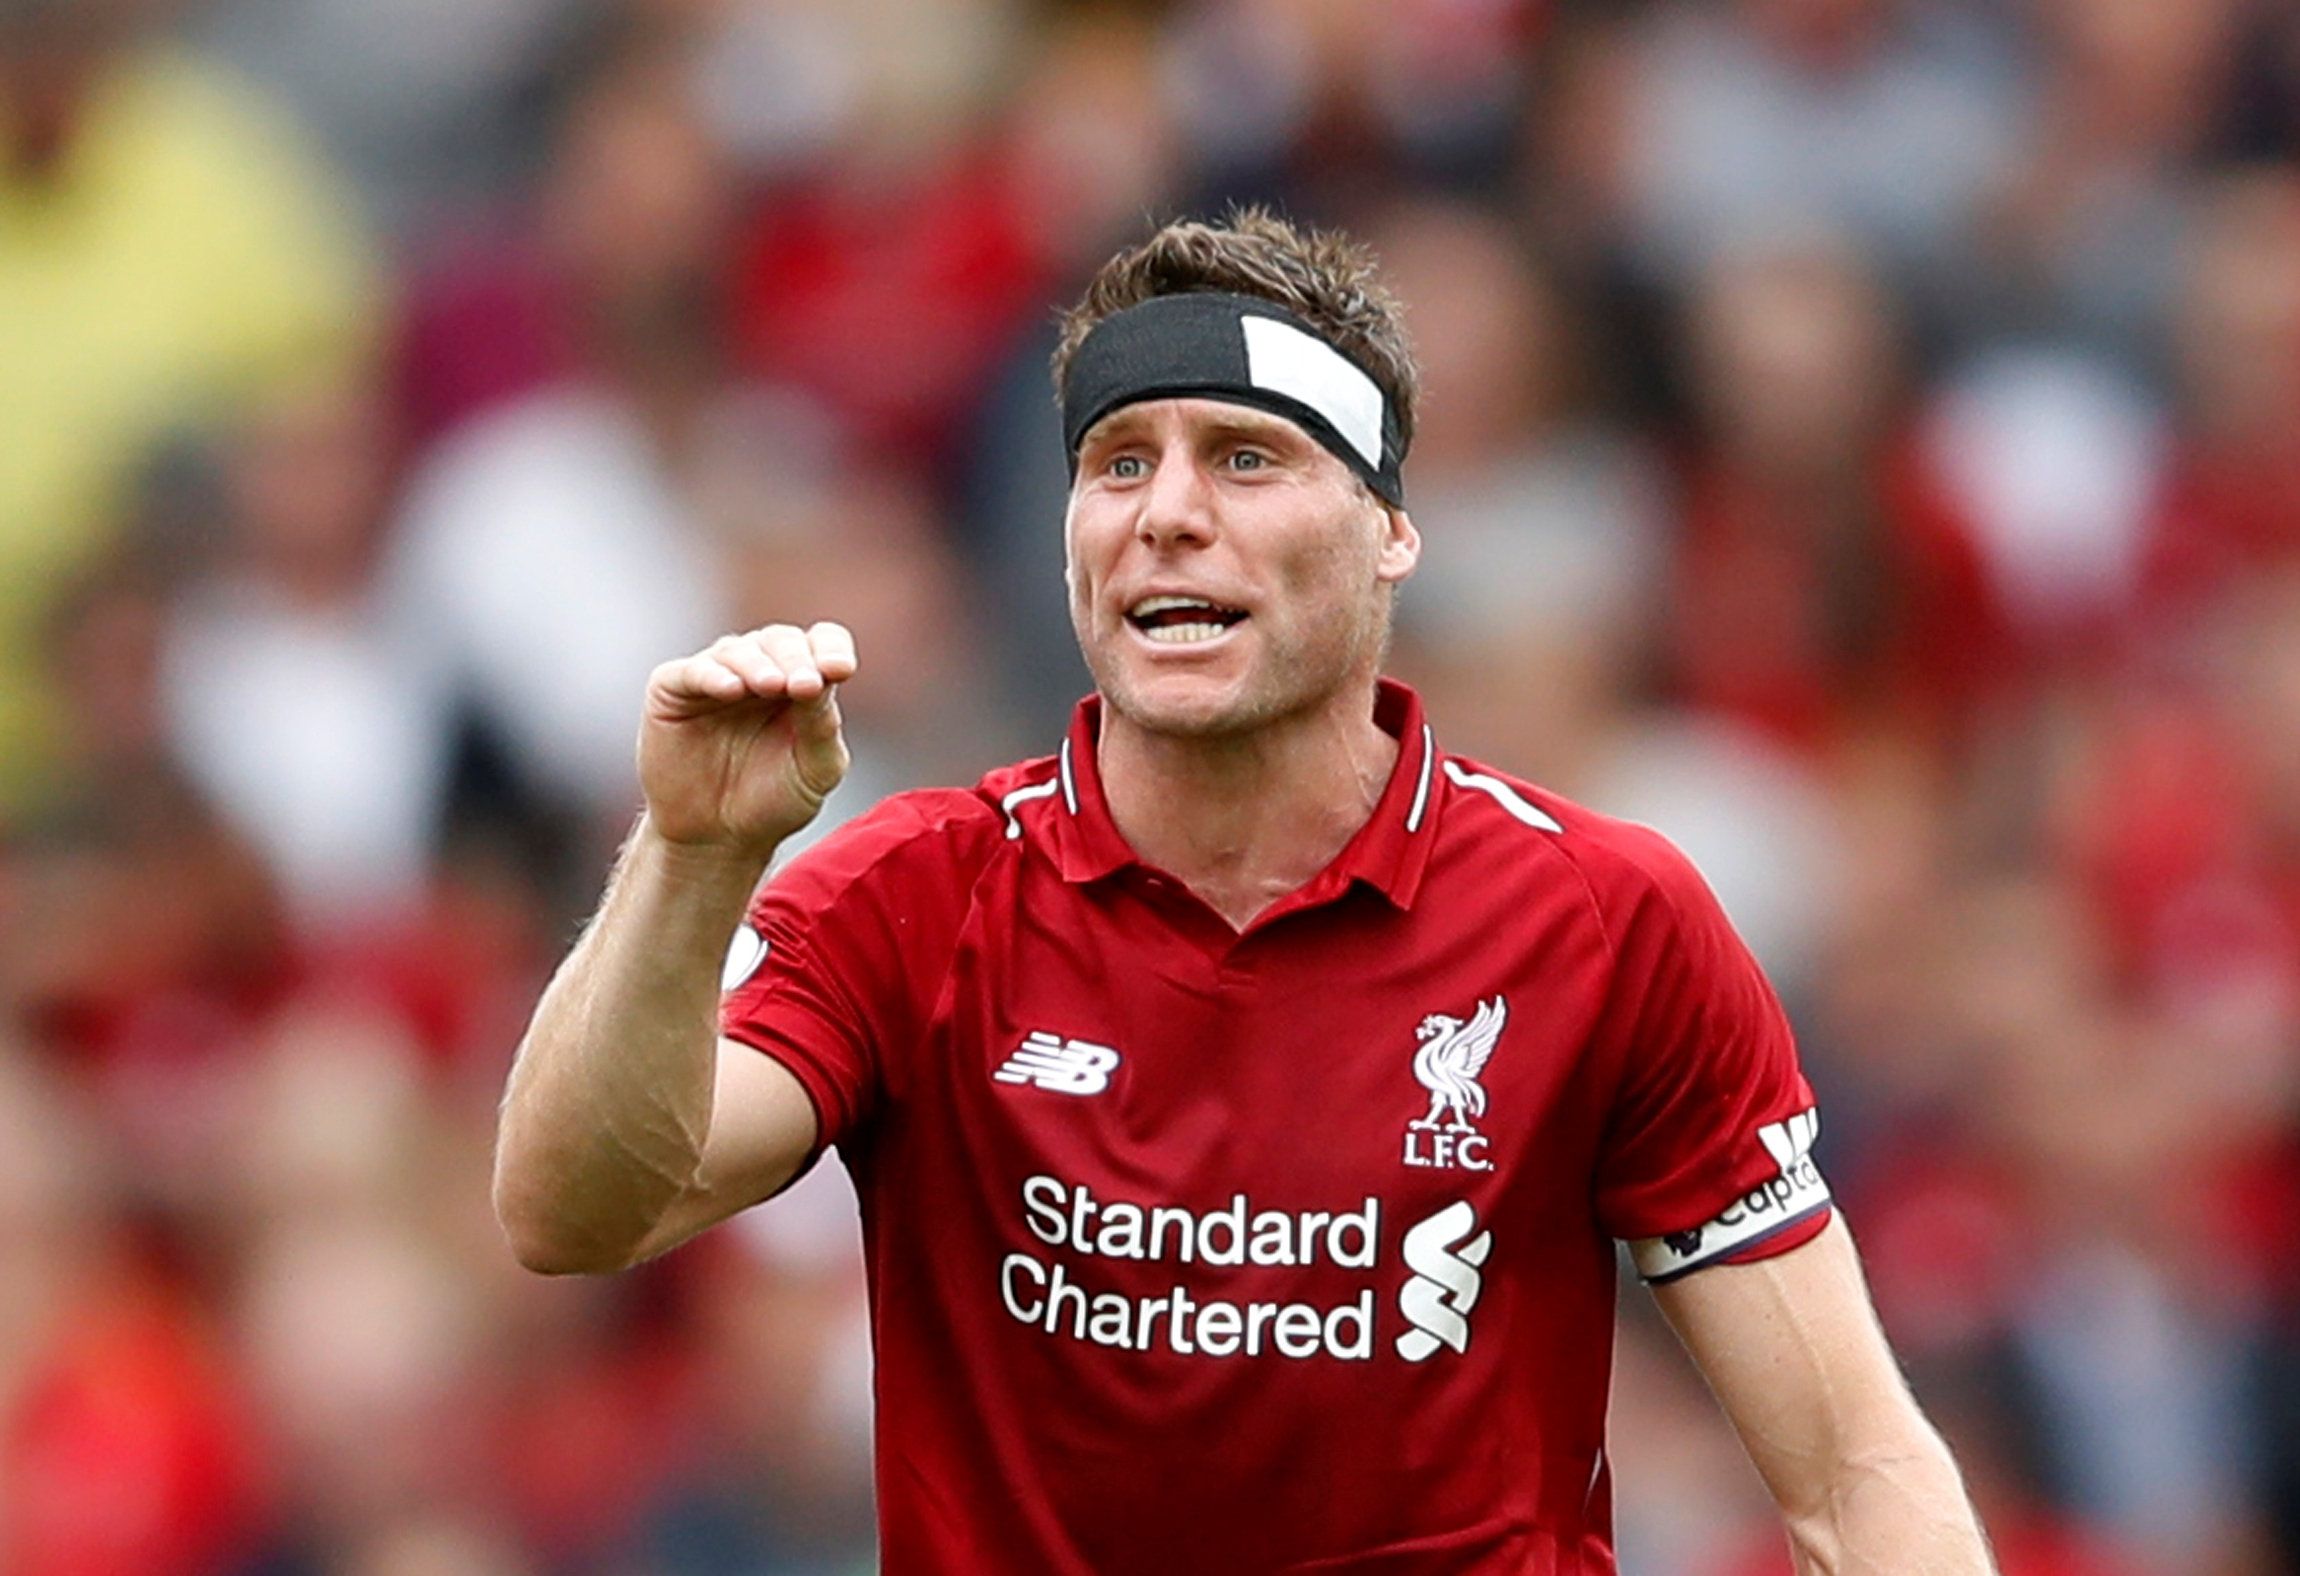 Soccer Football - Premier League - Liverpool v West Ham United - Anfield, Liverpool, Britain - August 12, 2018   Liverpool's James Milner gestures during the match    Action Images via Reuters/Carl Recine    EDITORIAL USE ONLY. No use with unauthorized audio, video, data, fixture lists, club/league logos or 